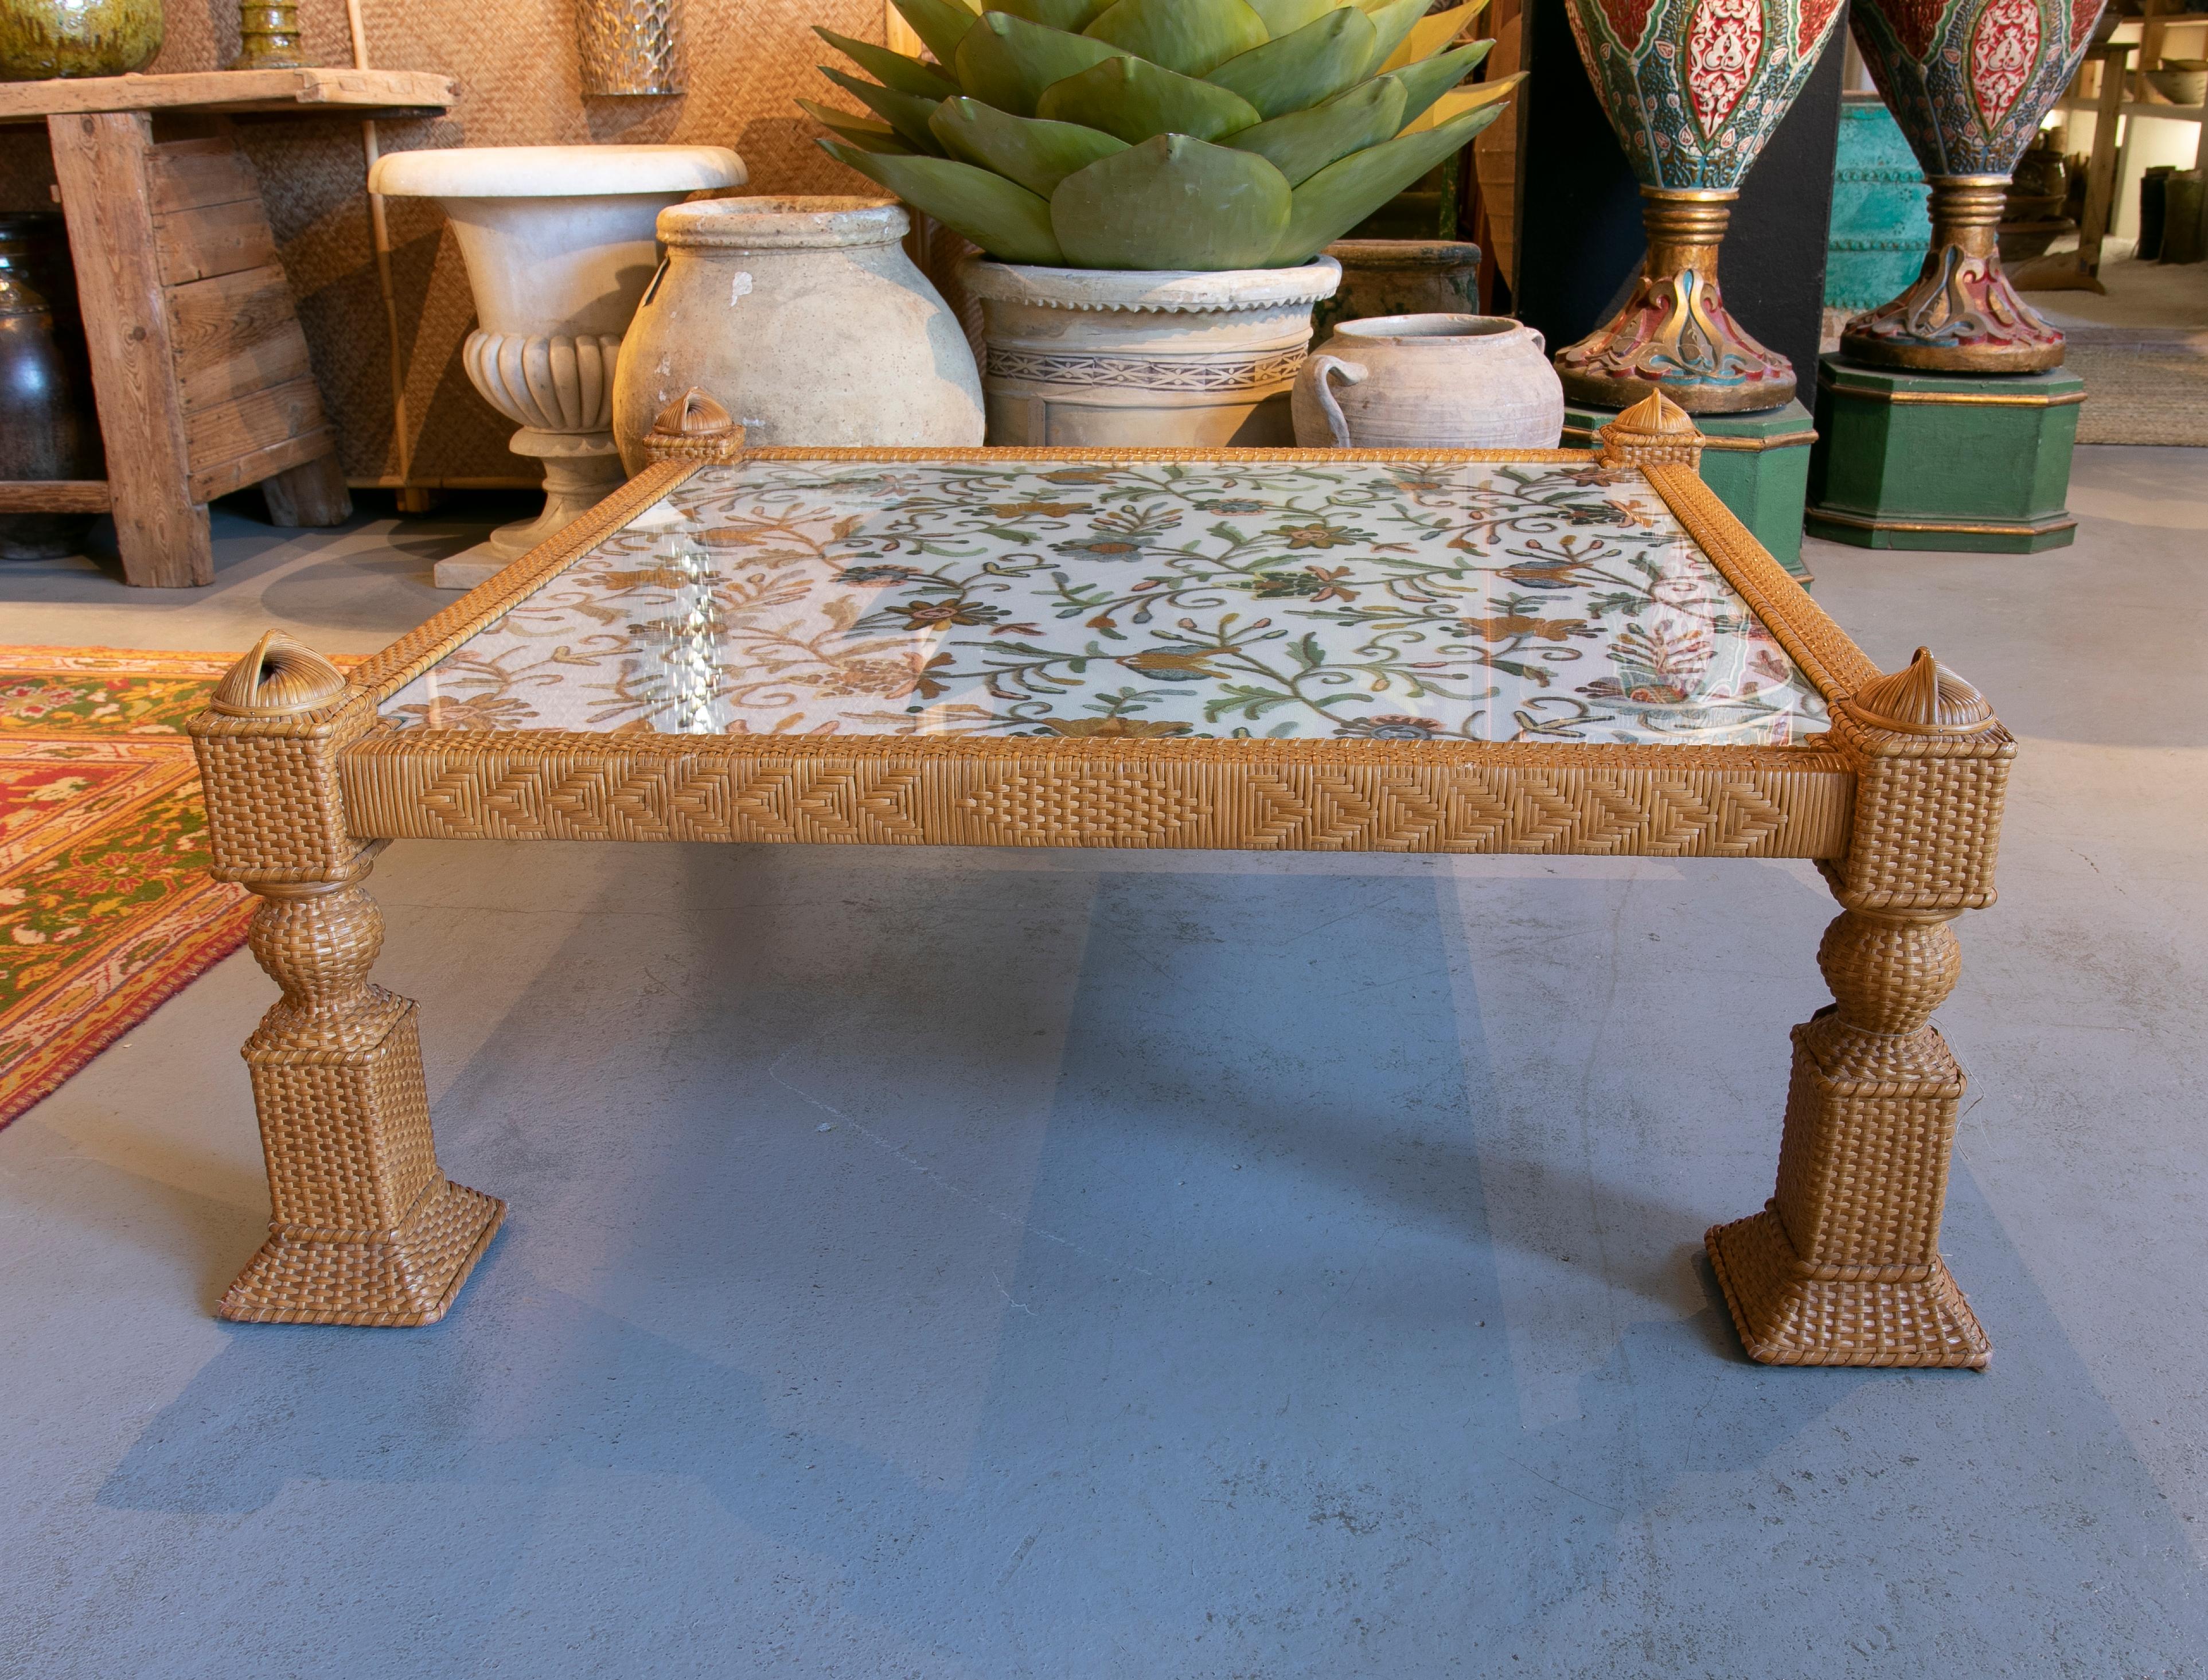 1970s square handmade wicker coffee table with embroidery.